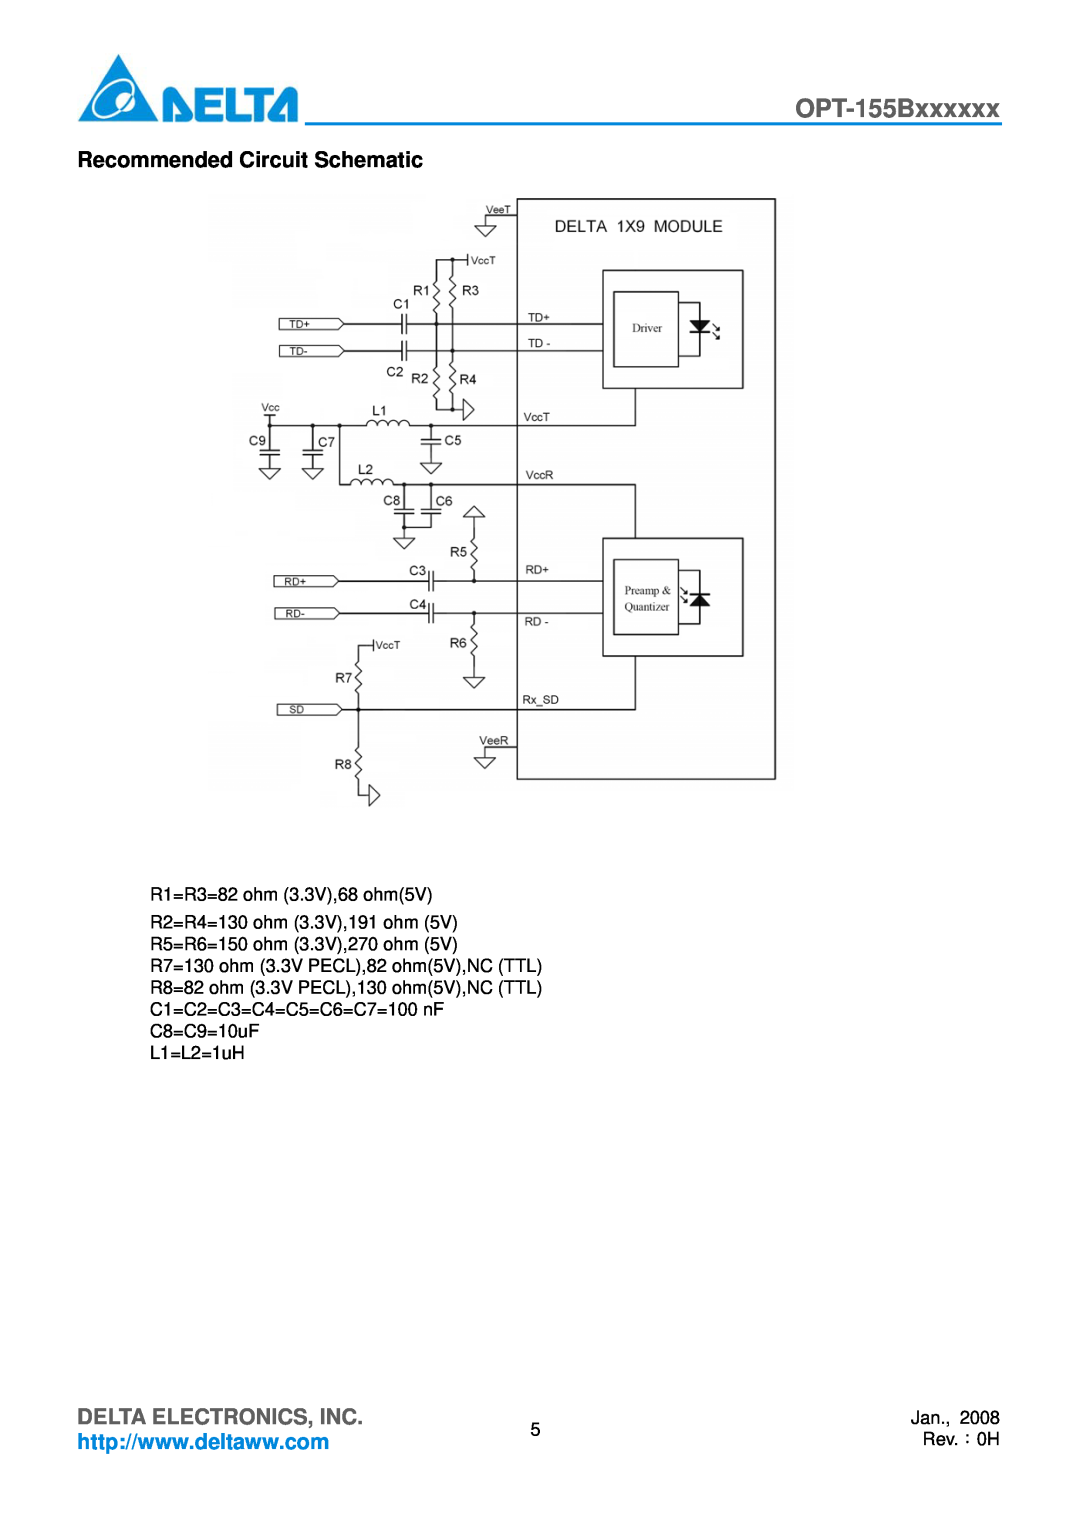 Delta Electronics OPT-155Bxxxxxx manual Recommended Circuit Schematic, Delta Electronics, Inc, R1=R3=82 ohm 3.3V,68 ohm5V 